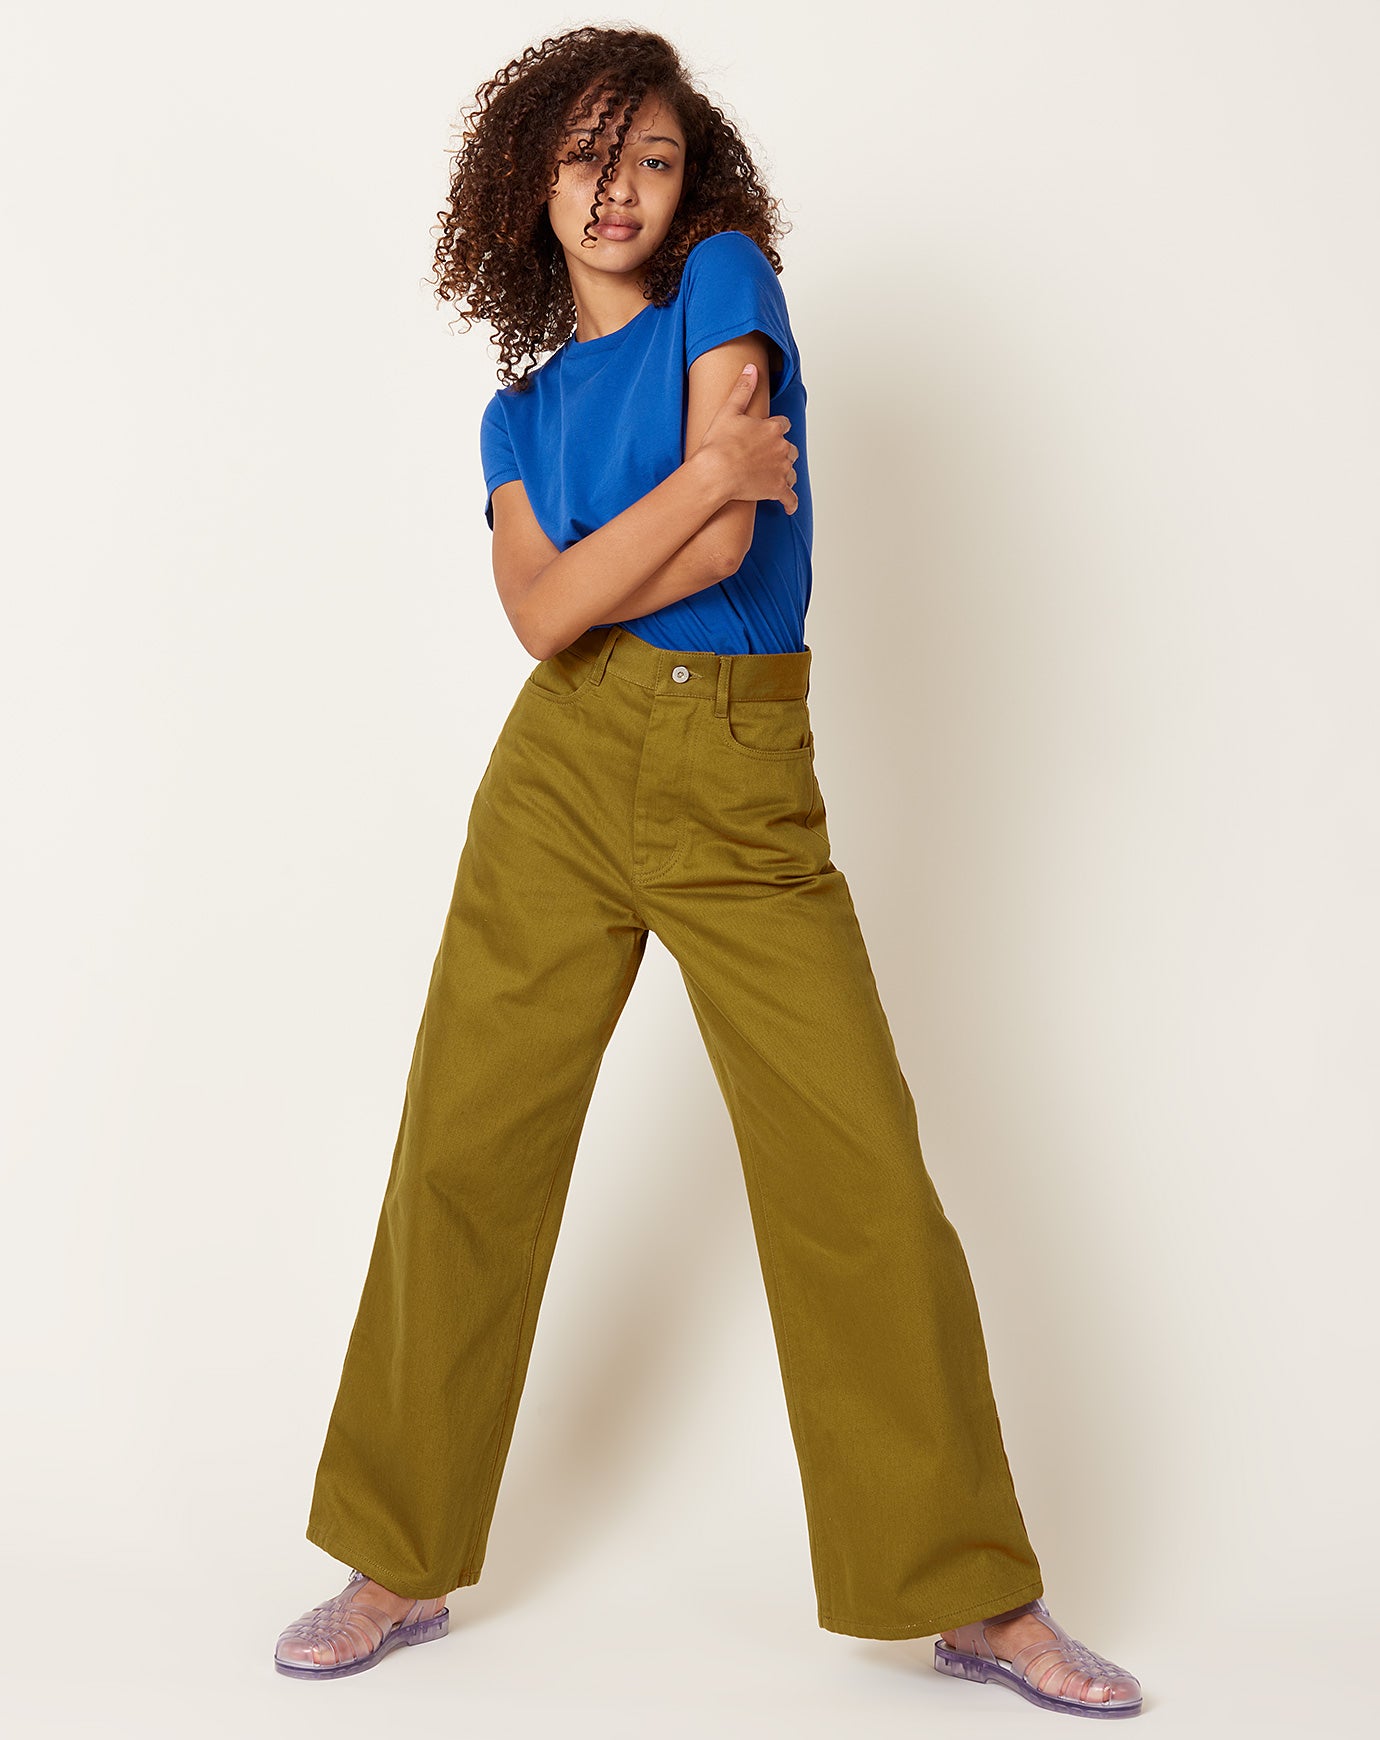 Kowtow Sailor Jeans in Chartreuse